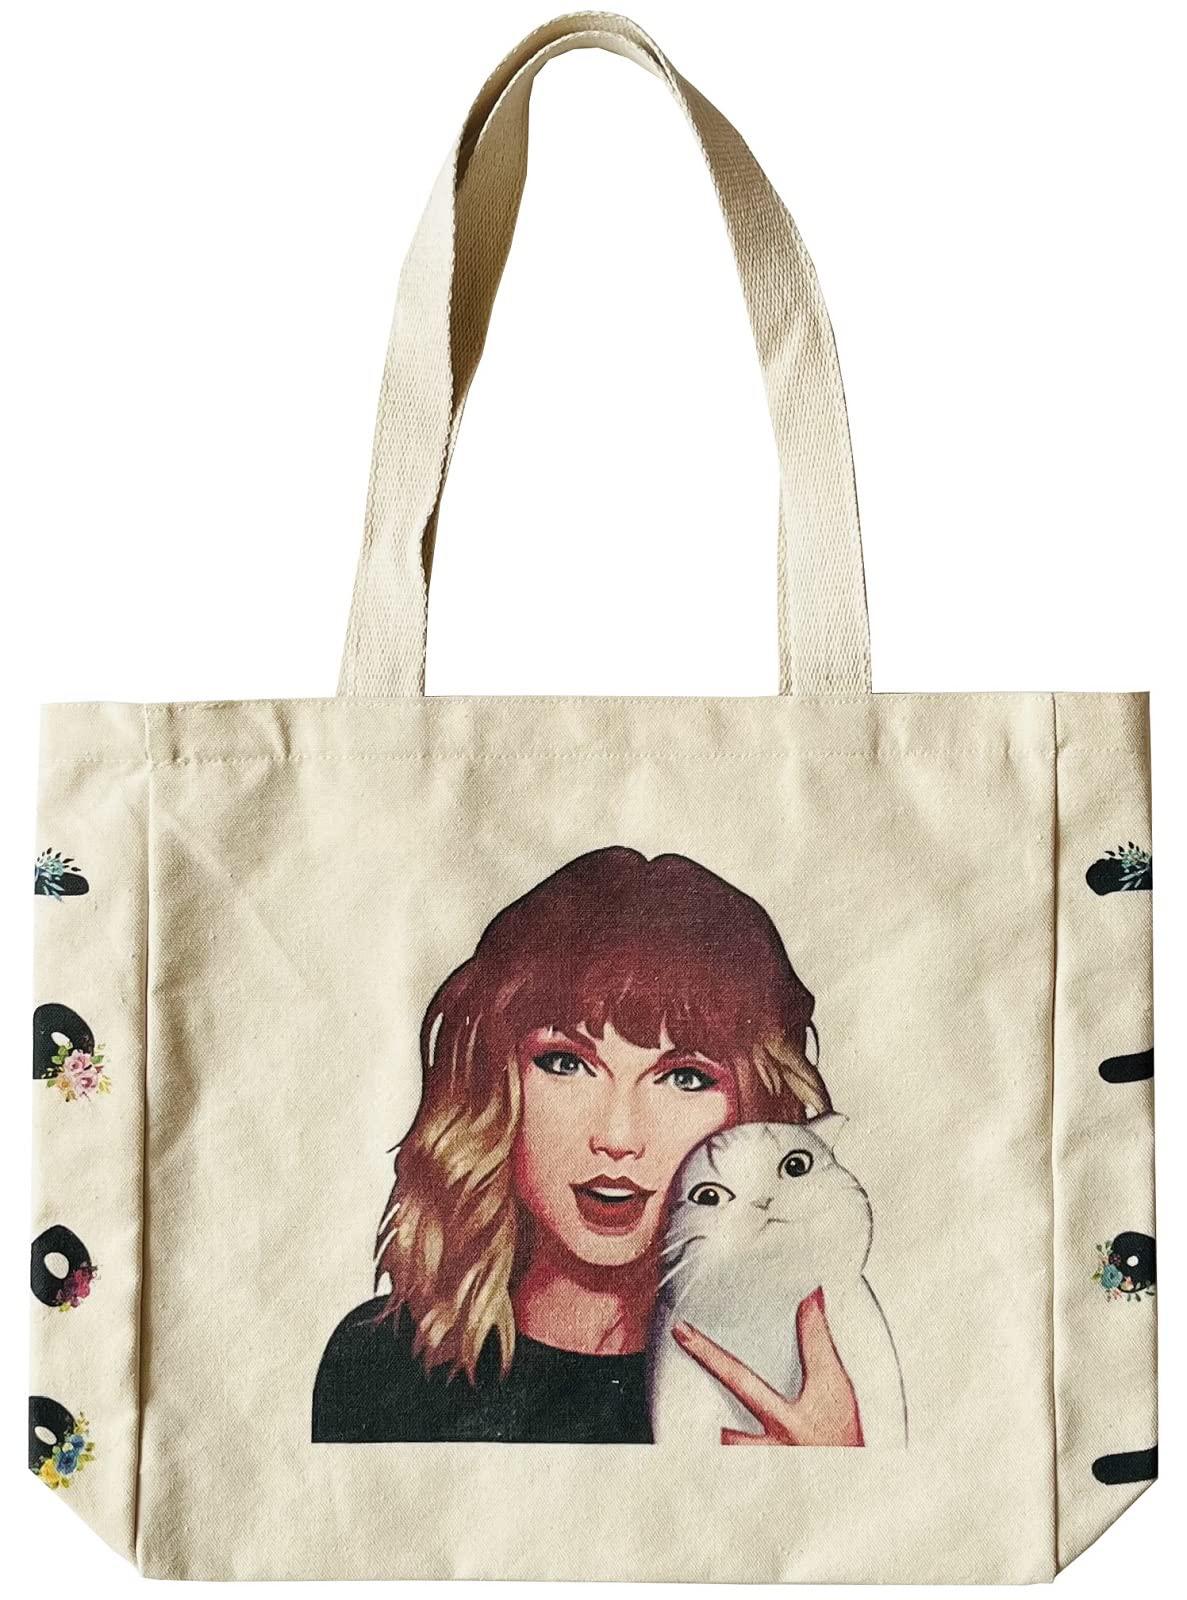 haohakka canvas taylor tote bag cute swift tote bag with zipper pockets christmas music gifts for women